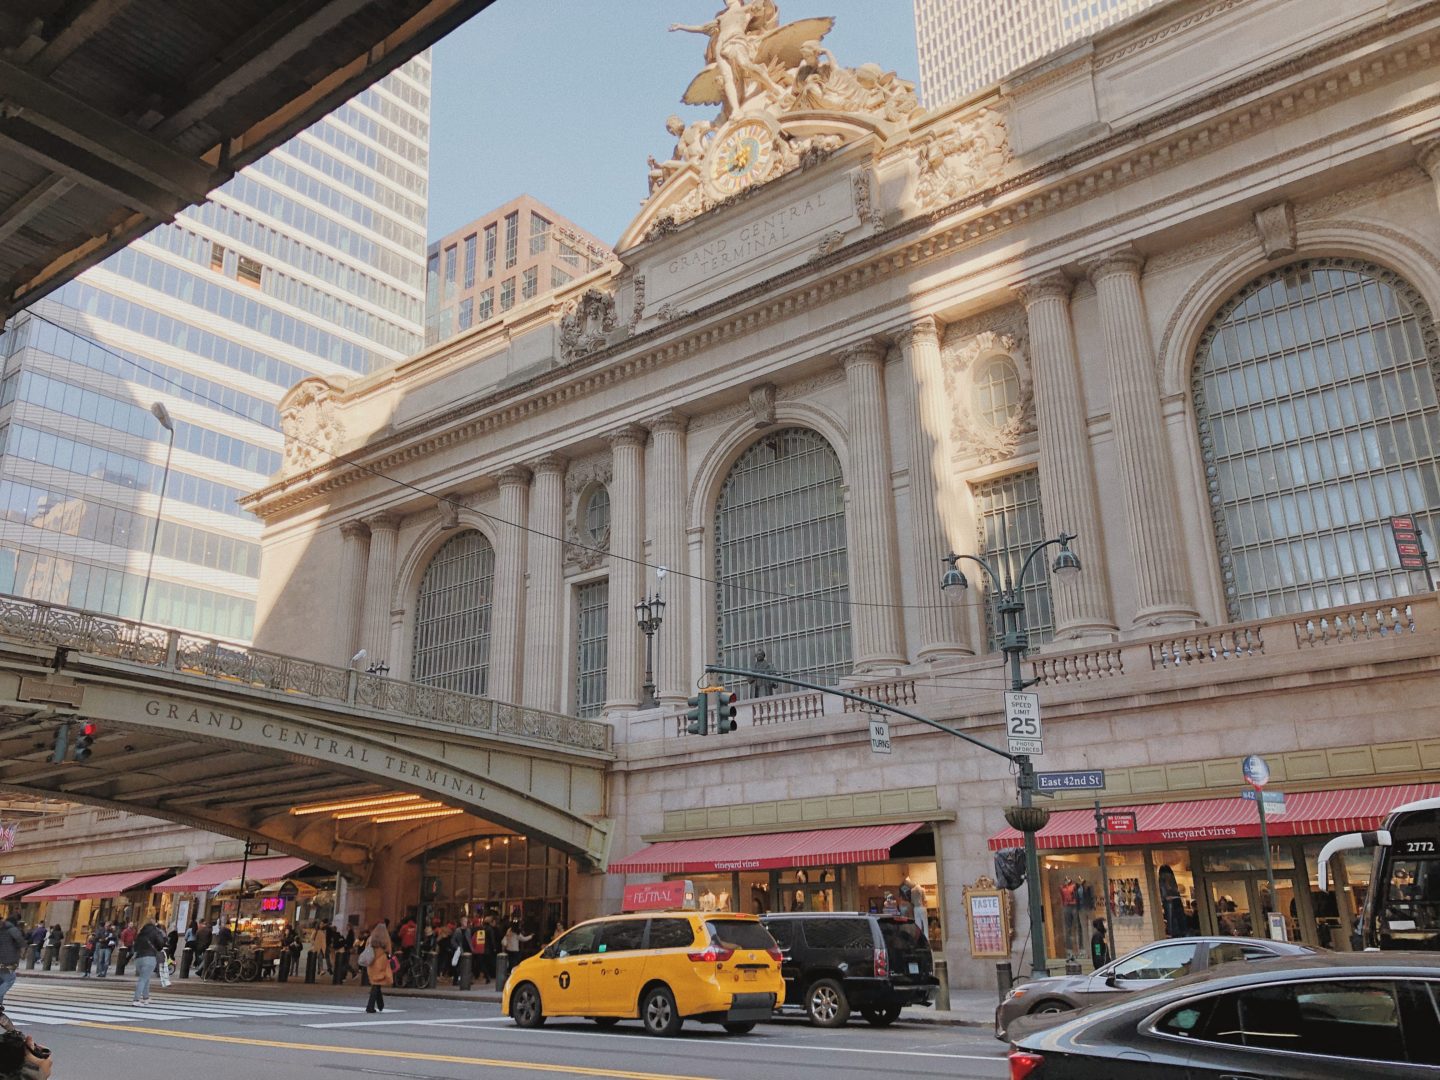 The outside view of Grand Central Station in New York City